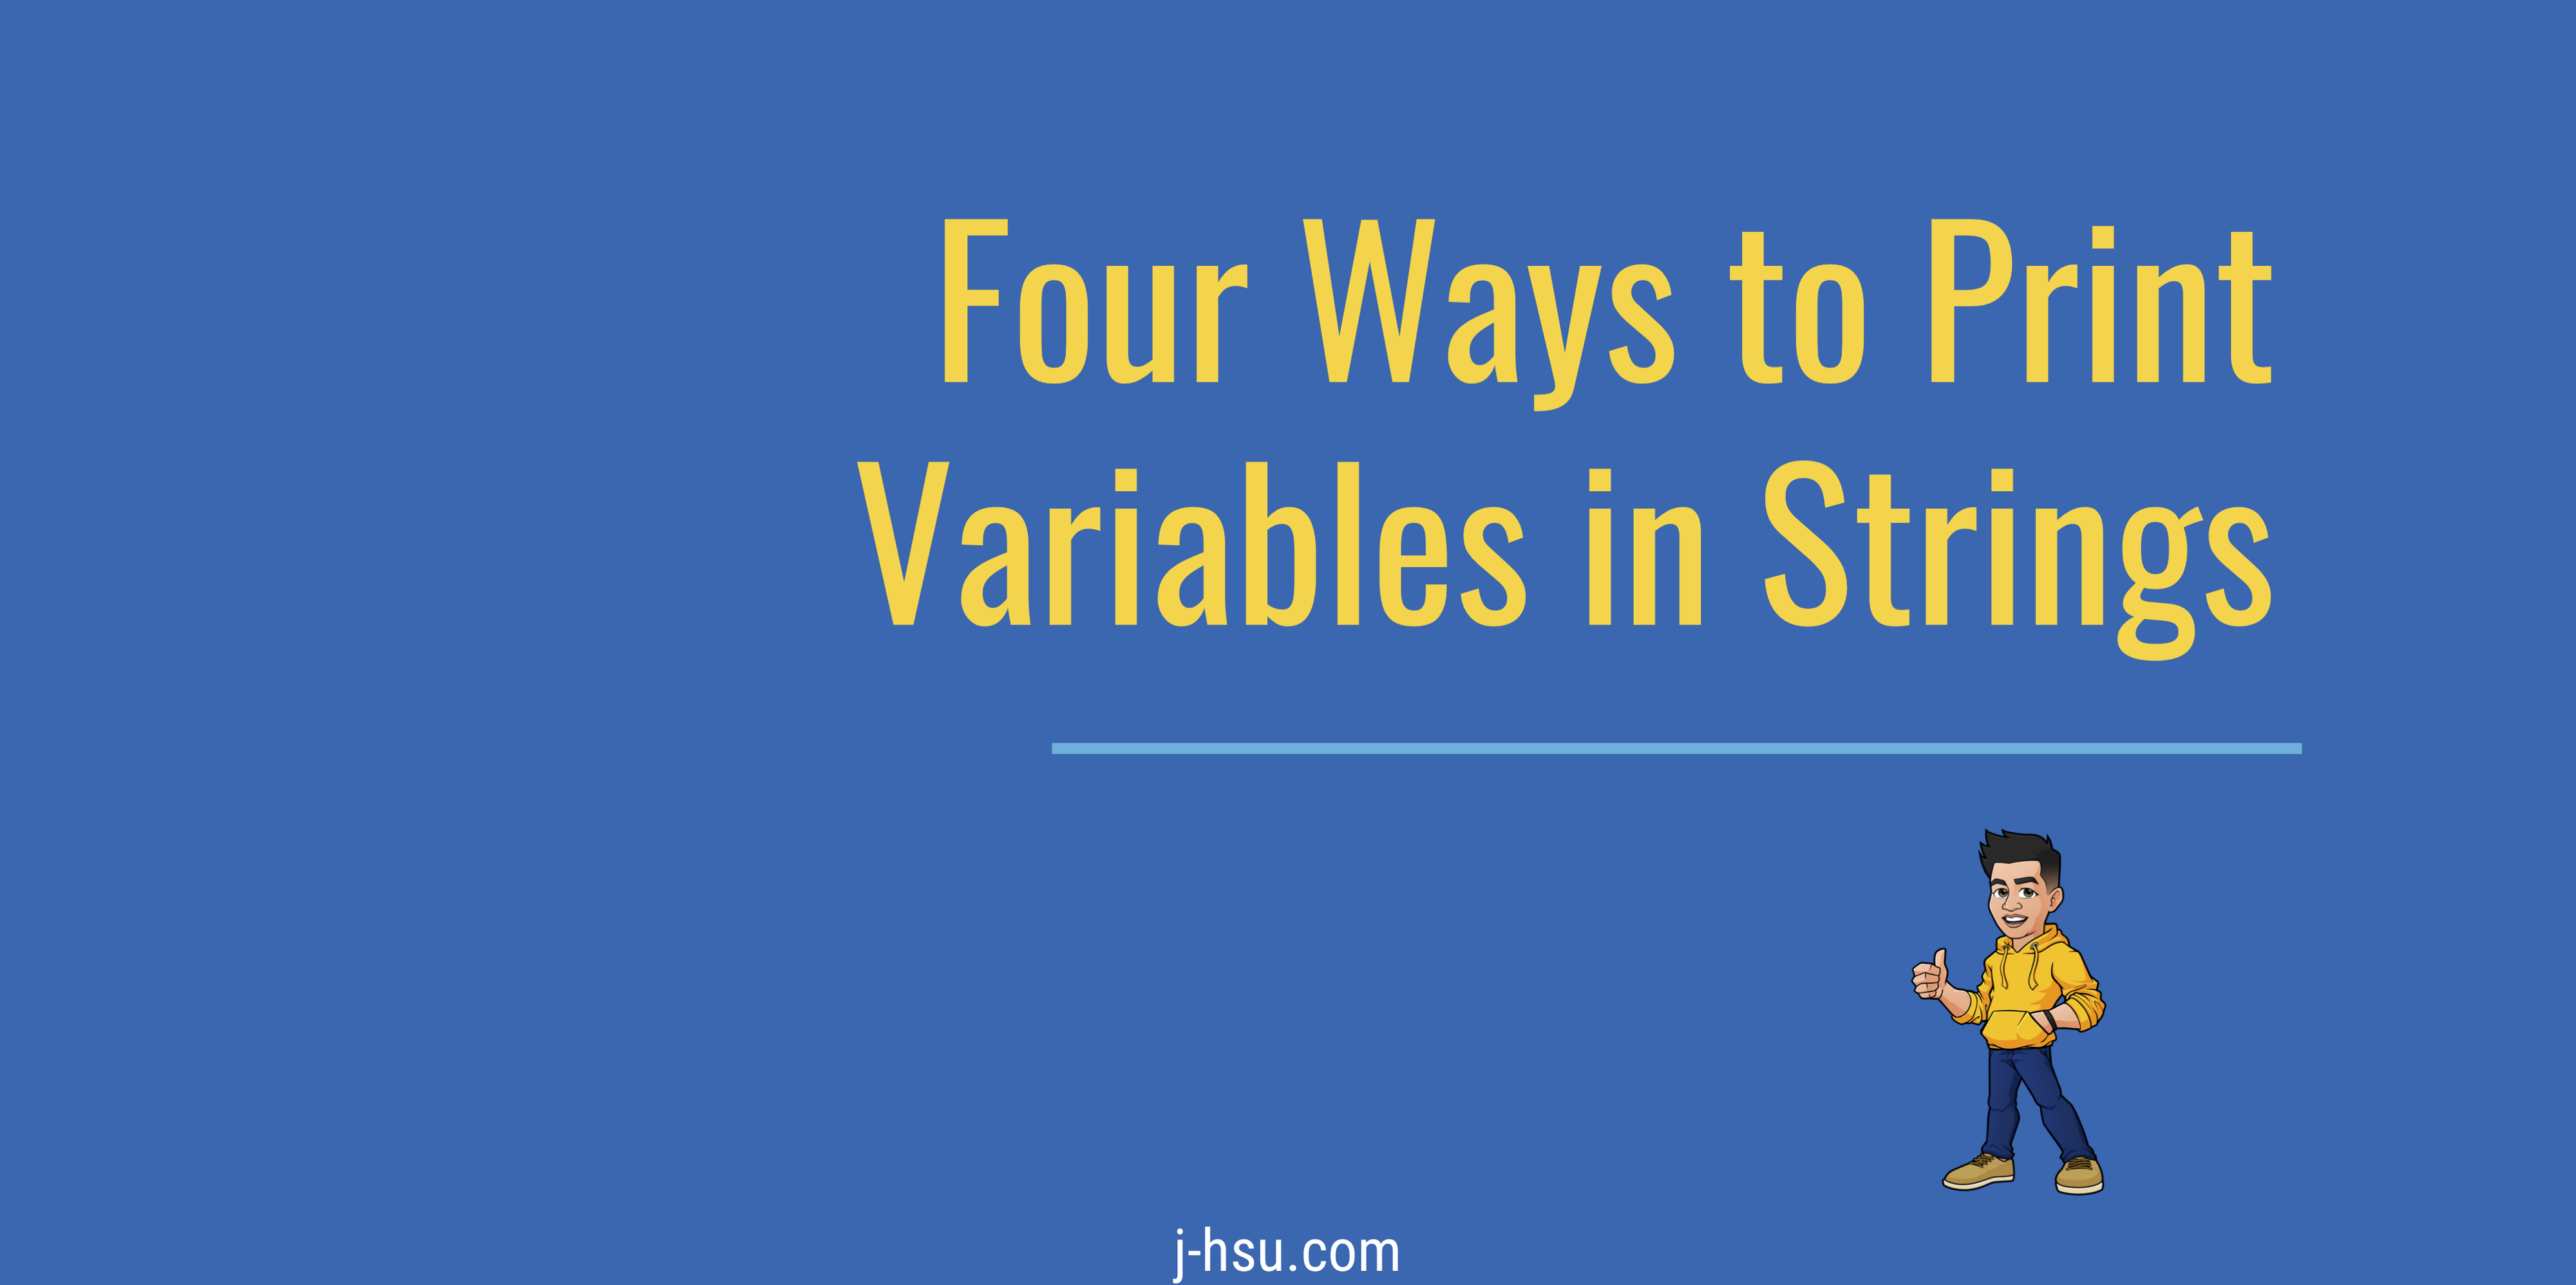 Four Ways to Print Variables in Strings